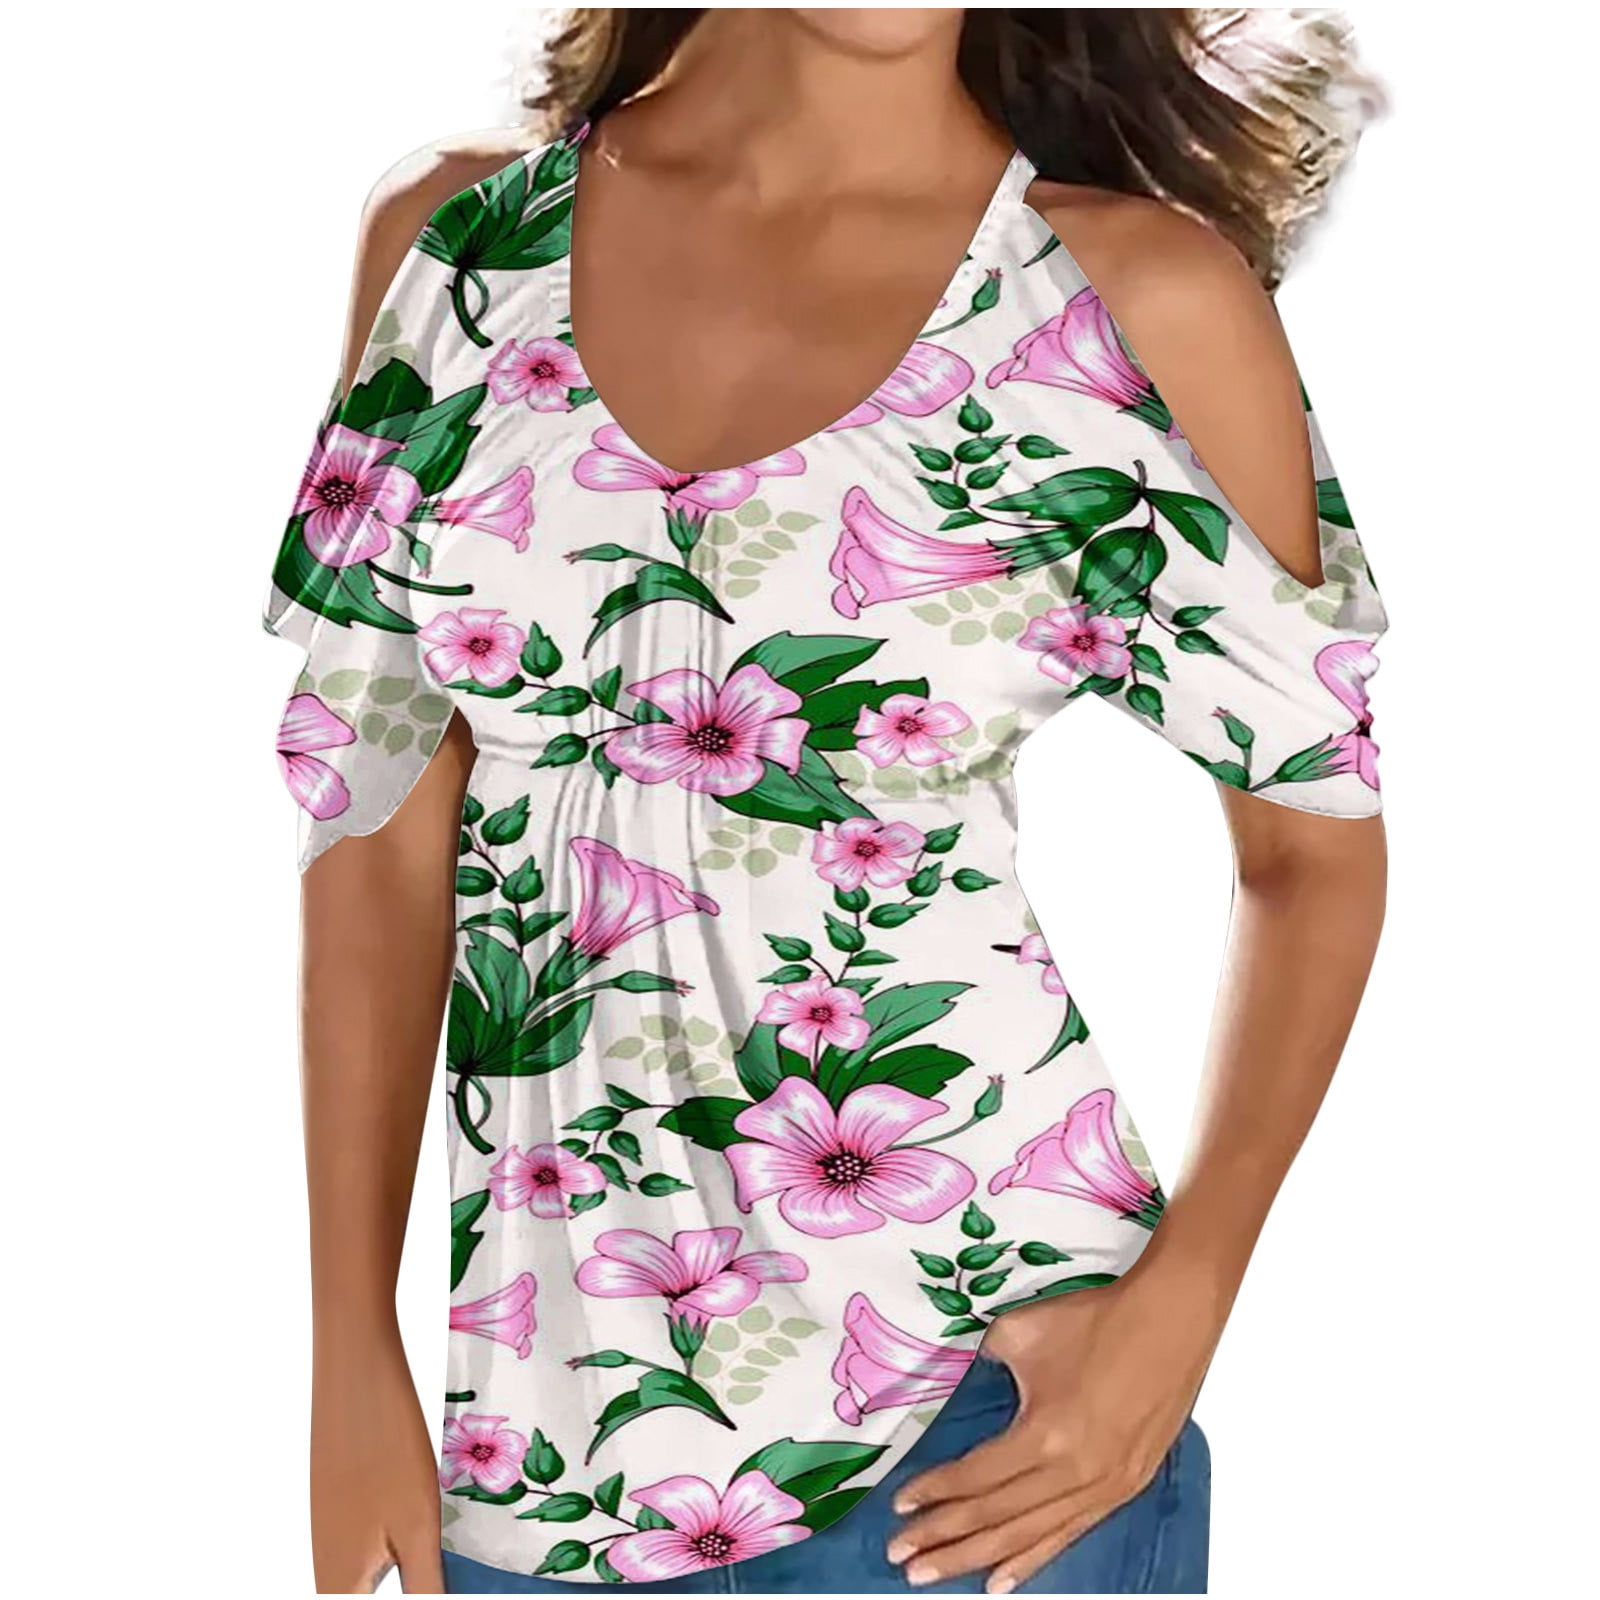 RQYYD Clearance Women's Cold Shoulder Tops Pleated Empire Waist Floral  Print Top Short Sleeve Scoop Neck Shirts Casual Blouses Tunics(2#Purple,S)  